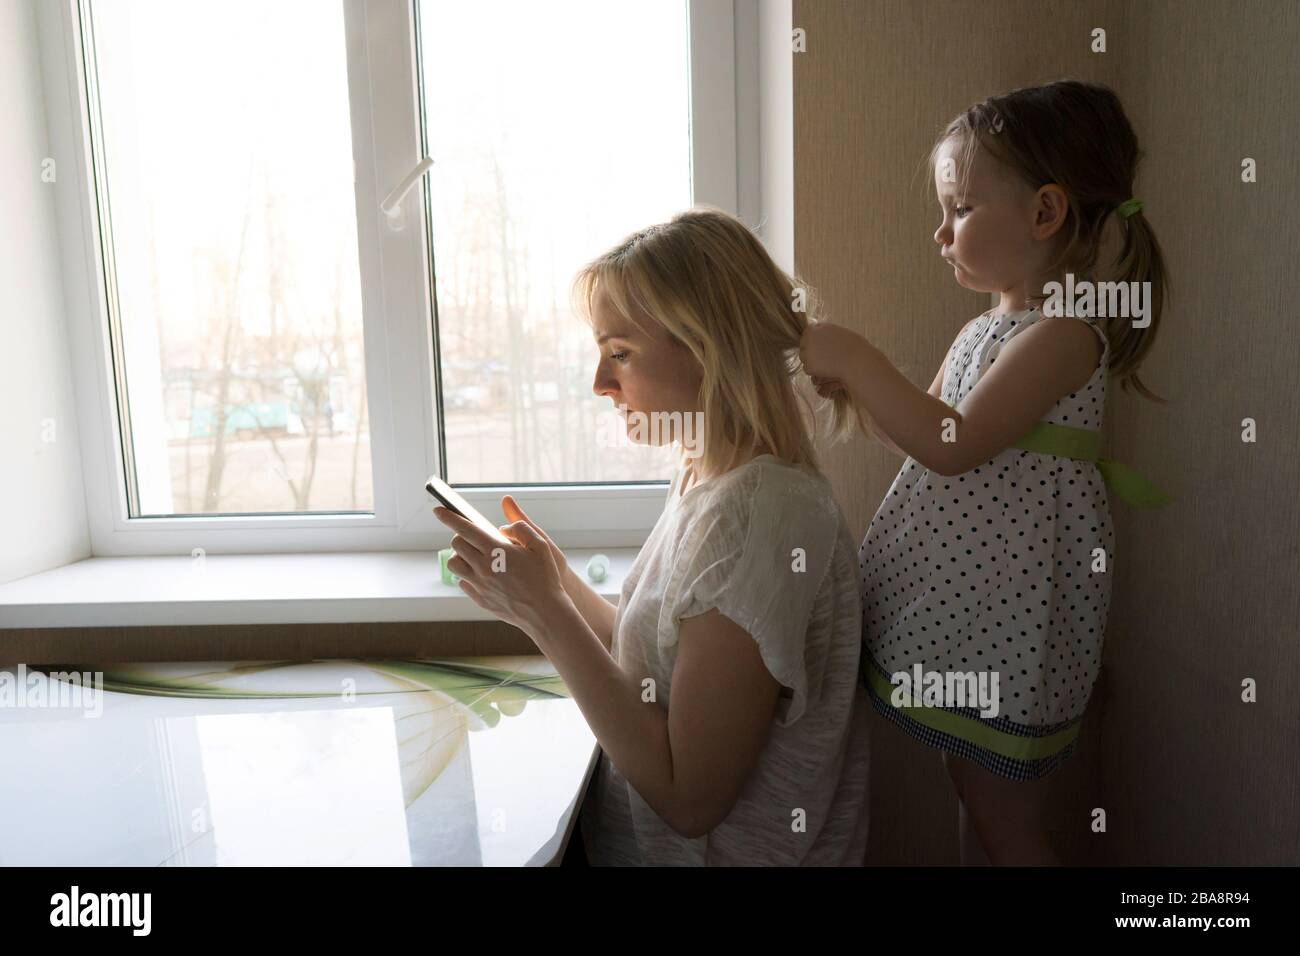 Mom and daughter are sitting by the window. Stock Photo